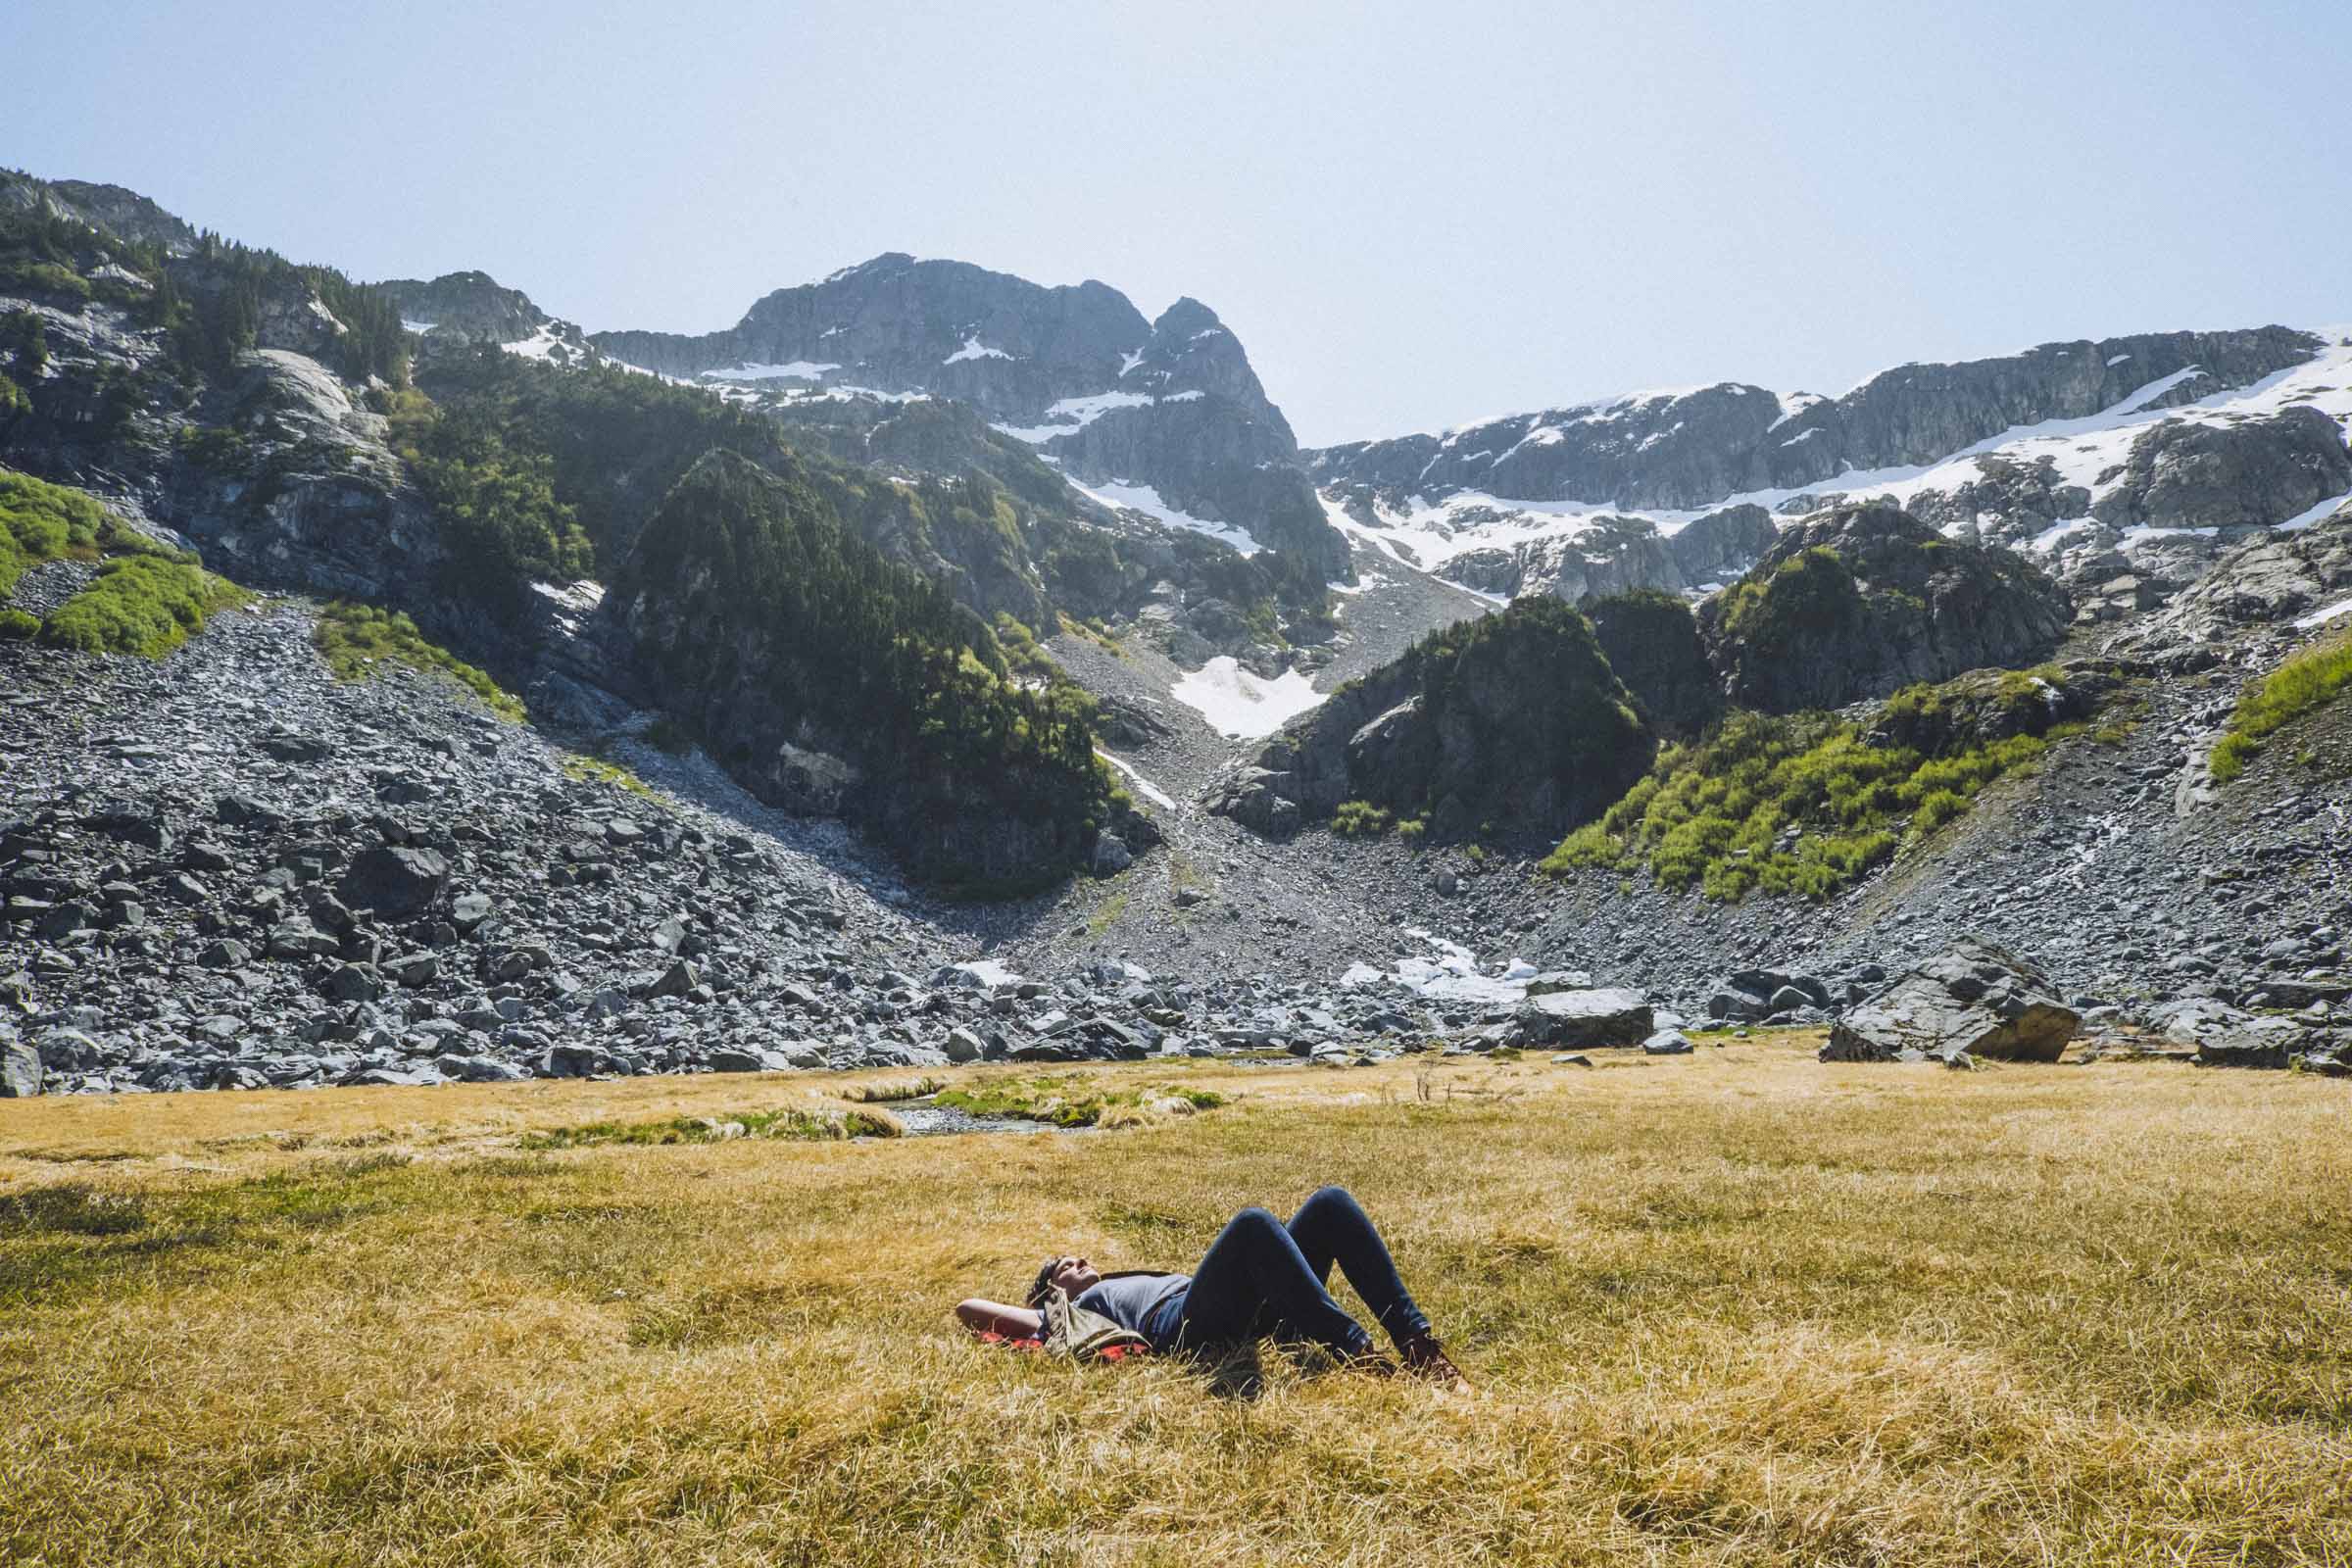 Taking a quick nap in the alpine meadow